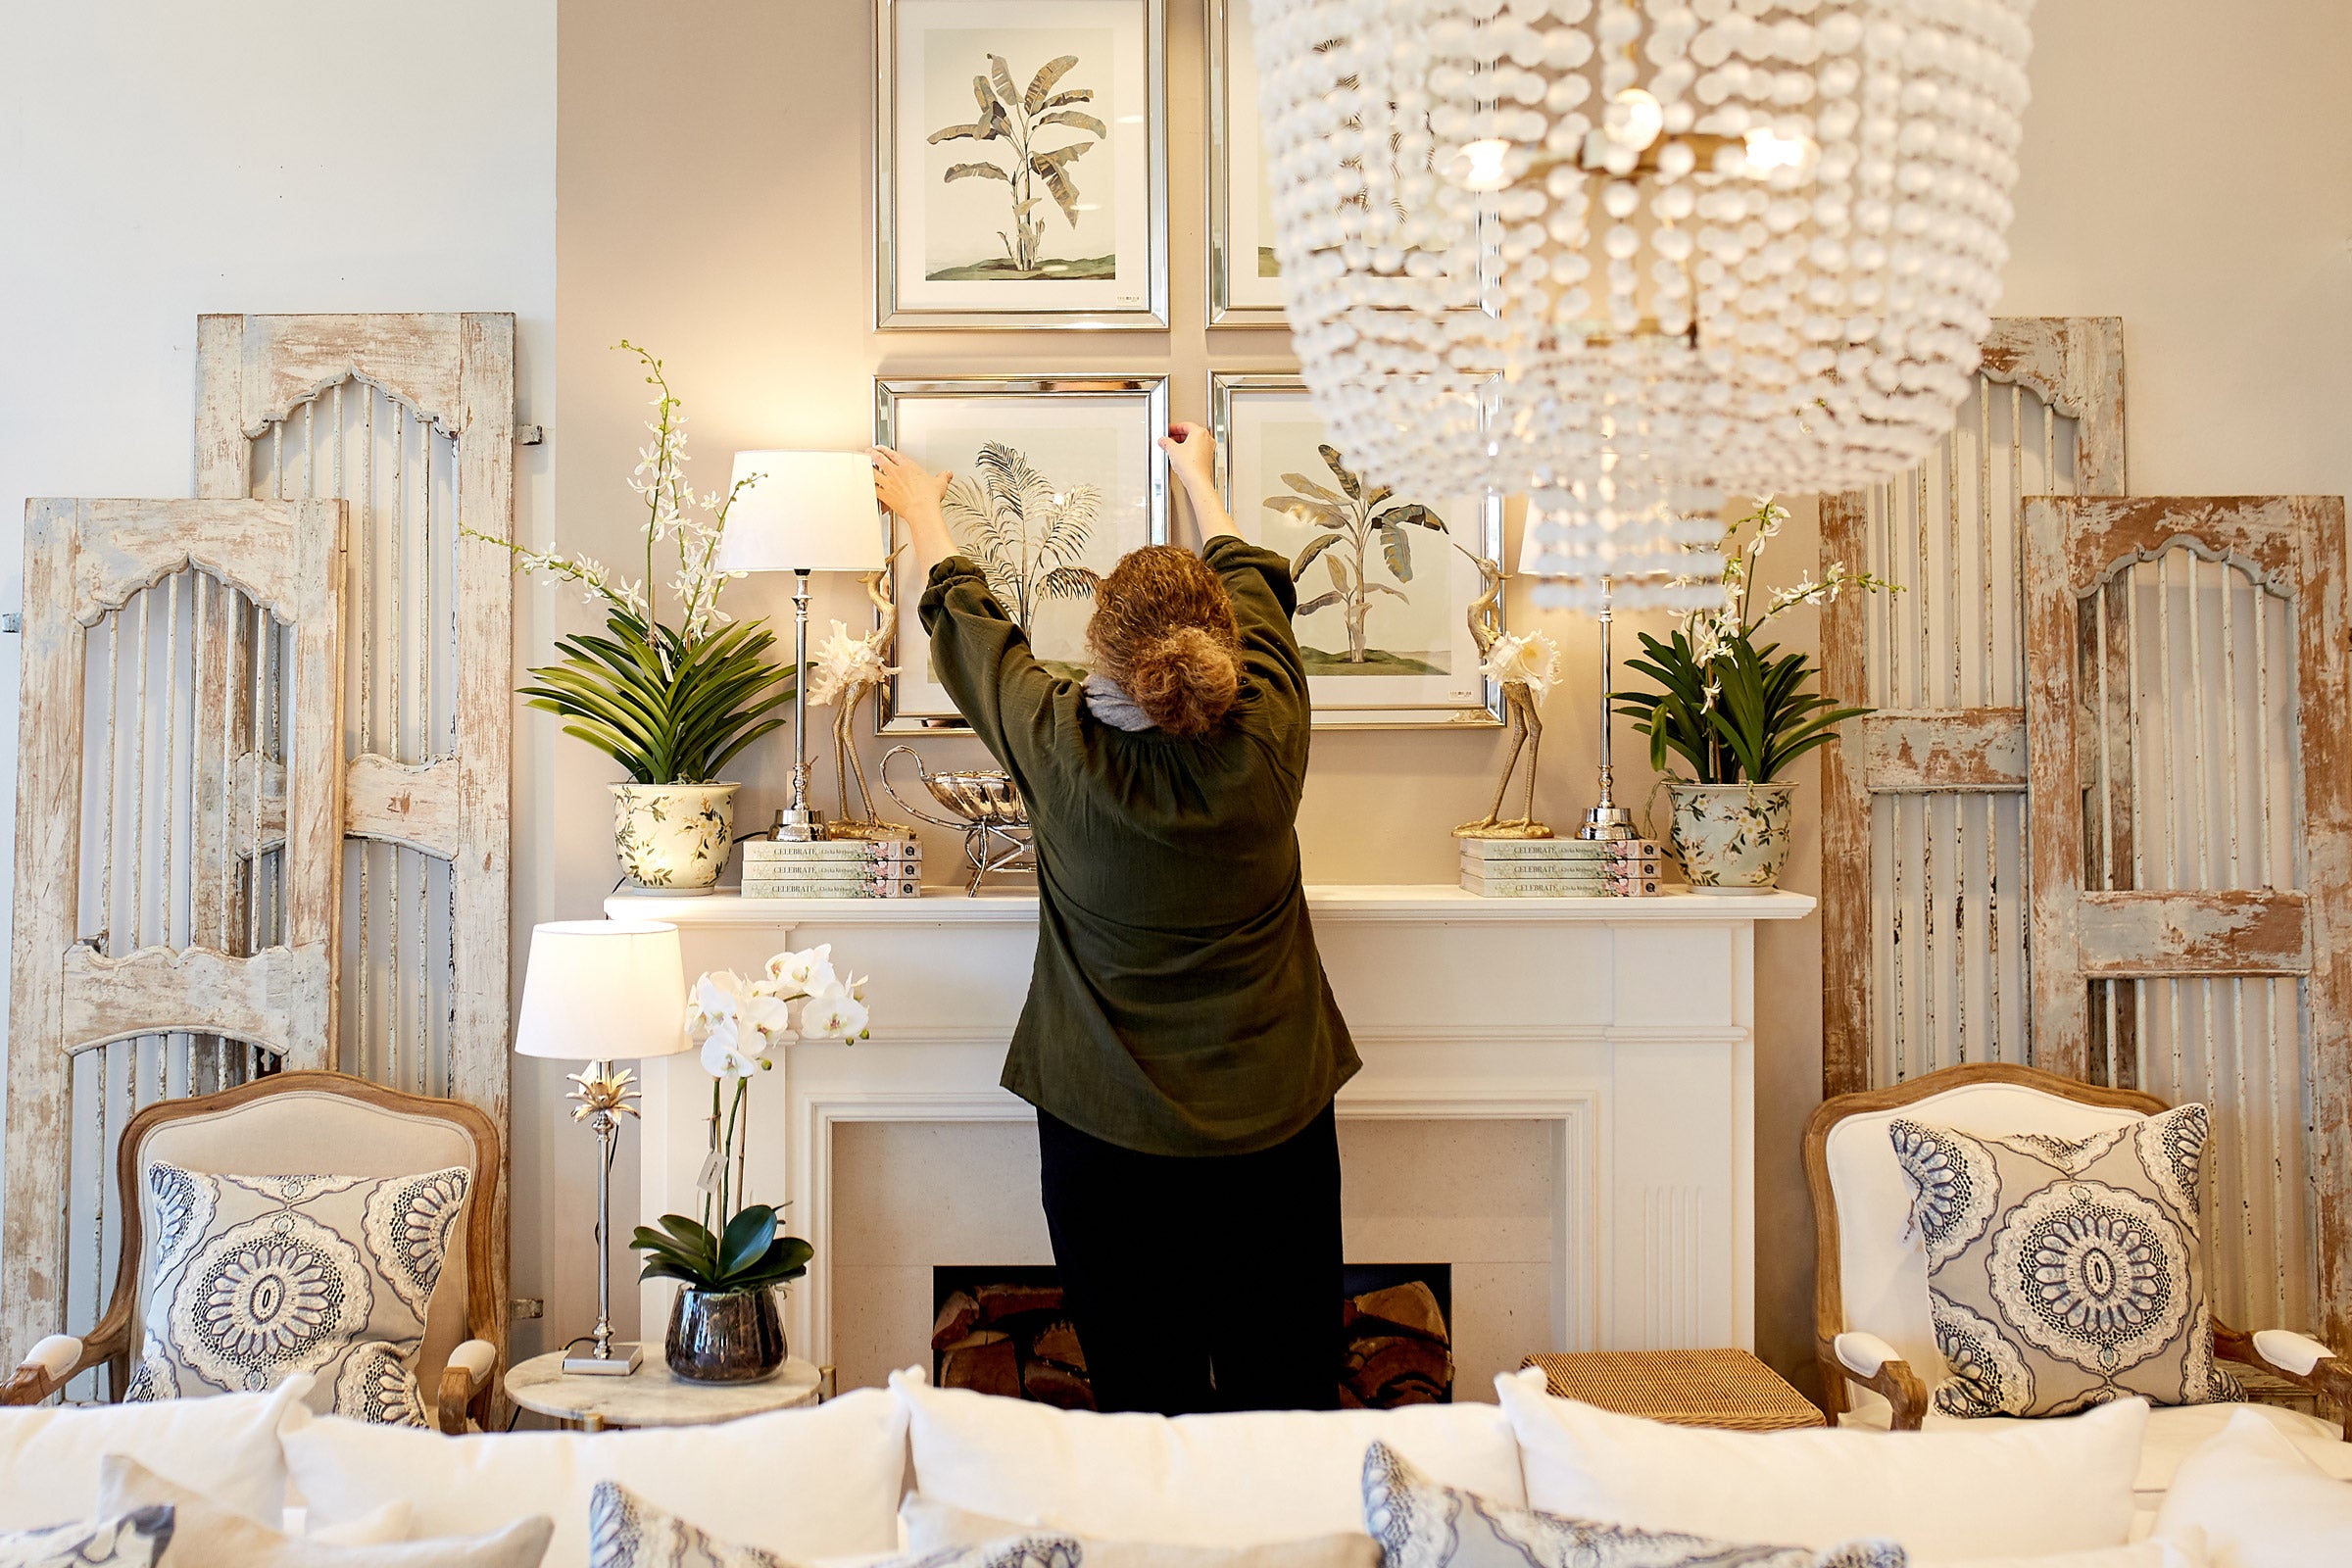 Our in-store visual merchandiser adjusting a display of prints above a mantle.